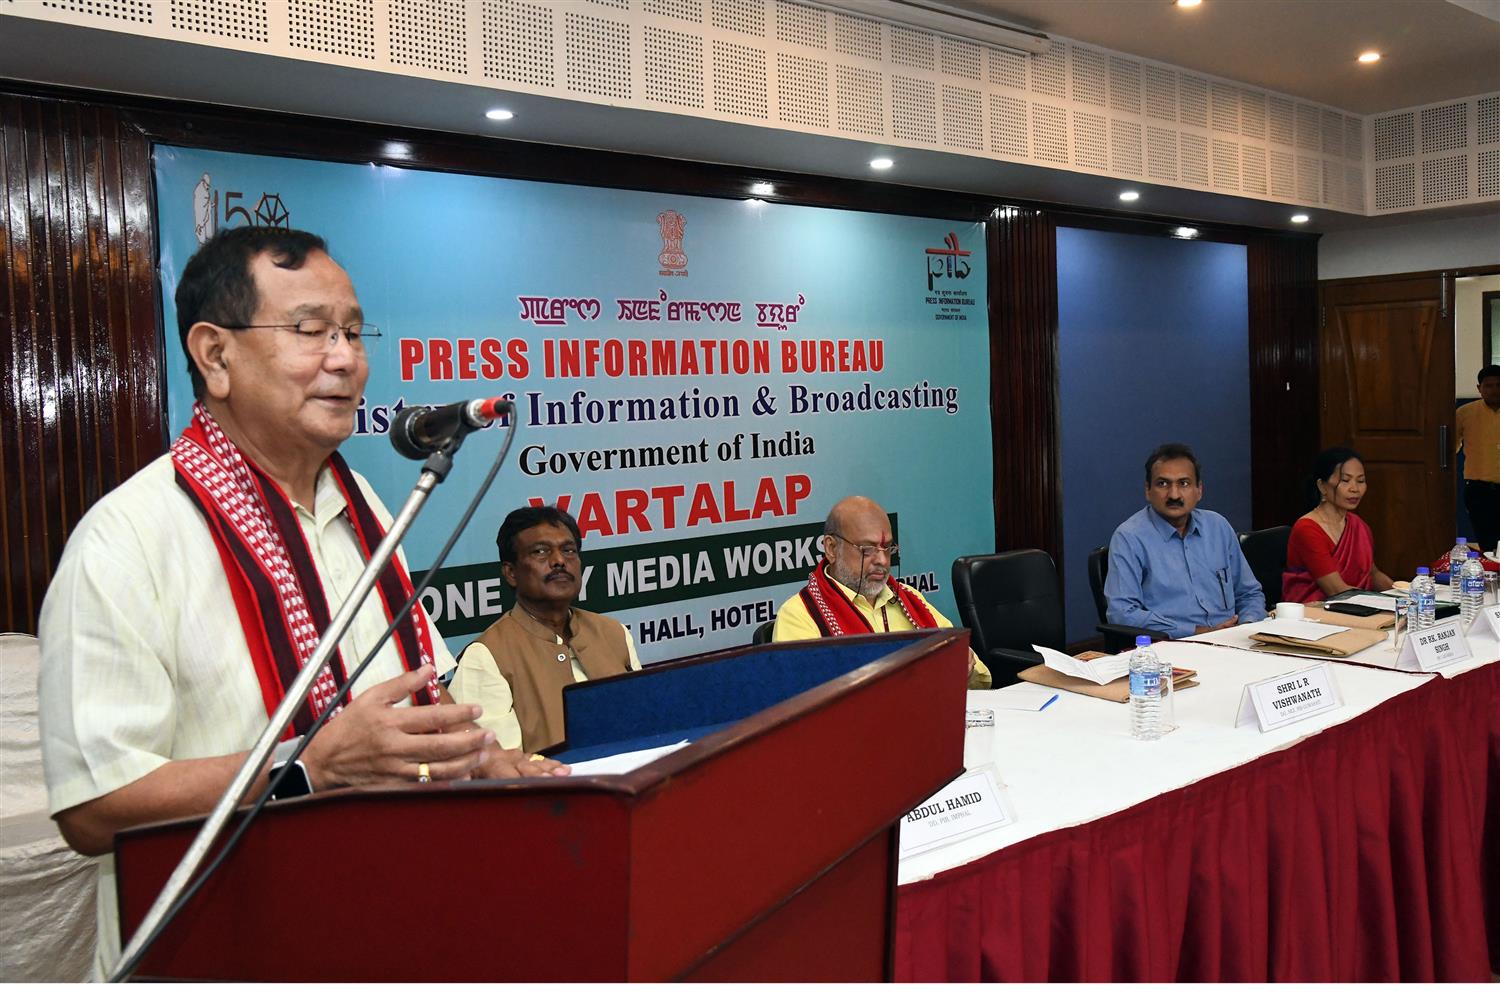 Dr. R.K. Ranjan Singh , Member of Parliament, Lok Sabha, Imphal, Manipur delivering his speech at the  inauguration of  Vartalap organized by Press Information Bureau, Imphal on 12th September 2019. Shri L R Vishwanath, Director General , Ministry of Information &  Broadcasting and Shri Abhishek Dayal, Director, PIB  Imphal are also seen.